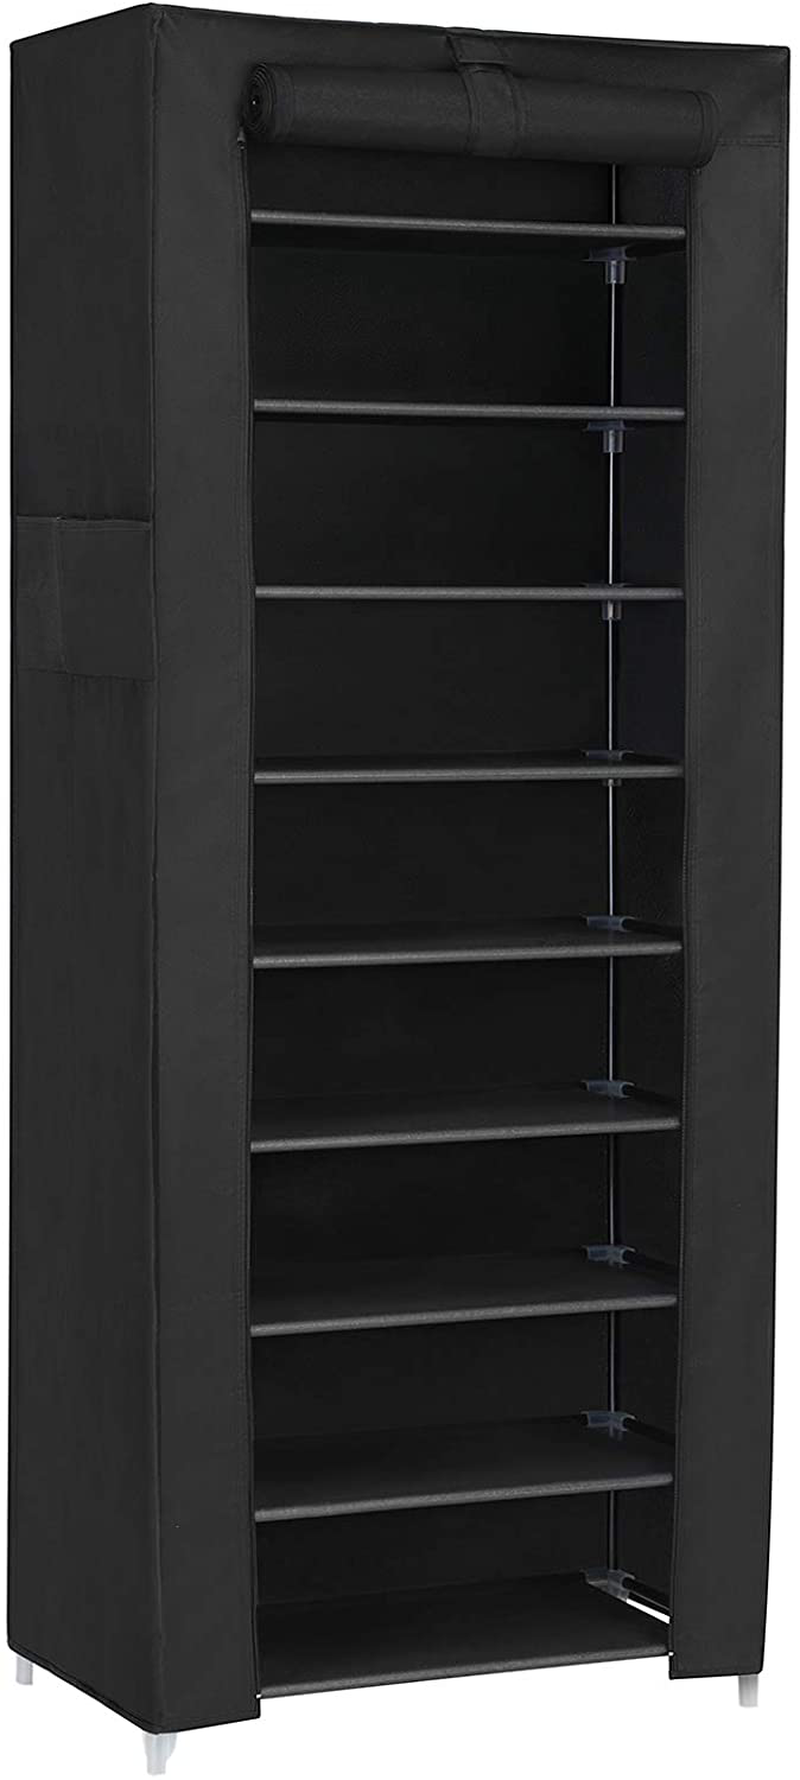 SONGMICS 10-Tier Shoe Rack, 34.6 X 11 X 63 Inches, Holds up to 50 Pairs, Storage Organizer with Dustproof Cover Gray Furniture > Cabinets & Storage > Armoires & Wardrobes SONGMICS Black 22.7 x 11 x 63 Inches 